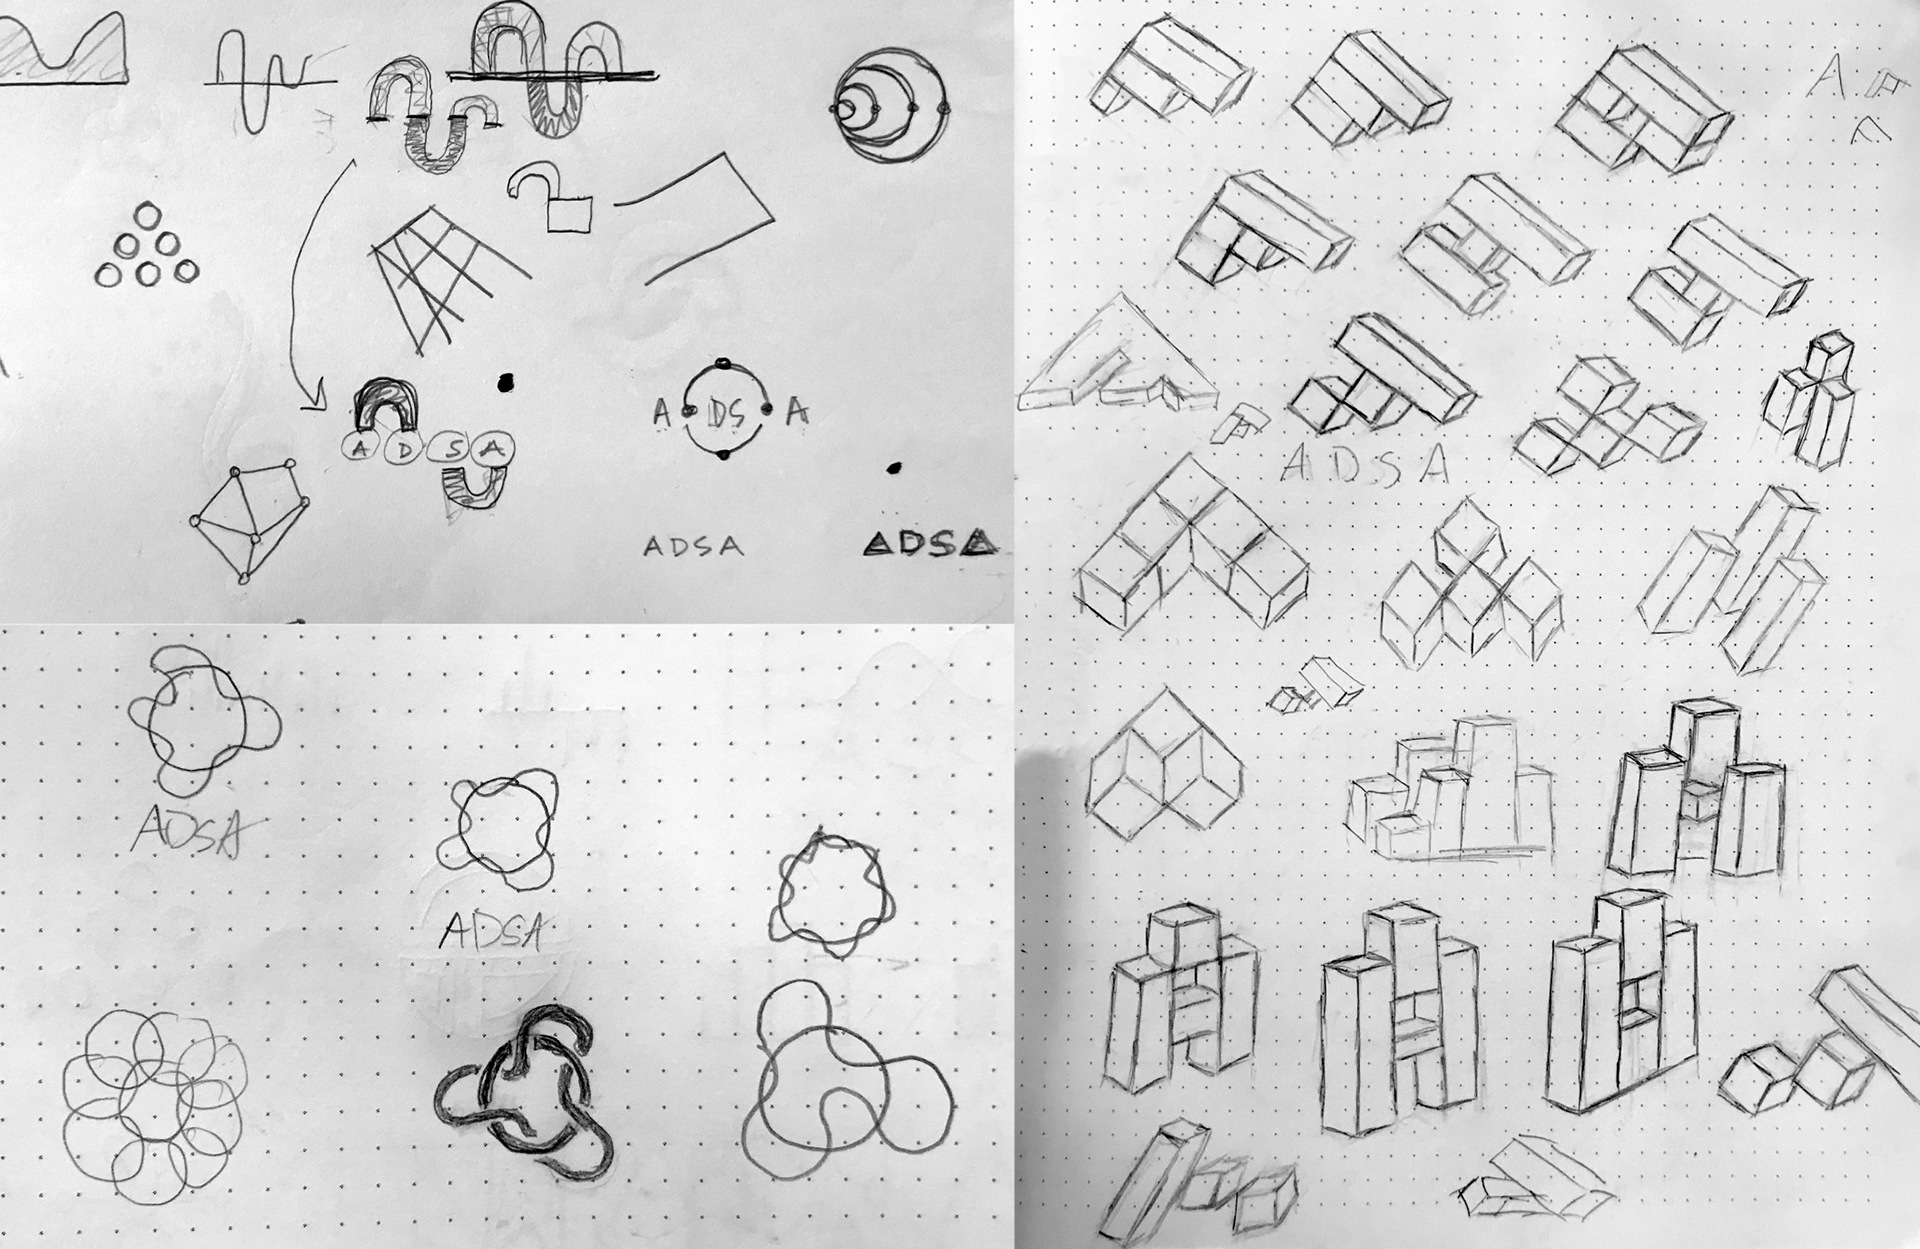 Pencil and paper sketches of initial ADSA logo designs